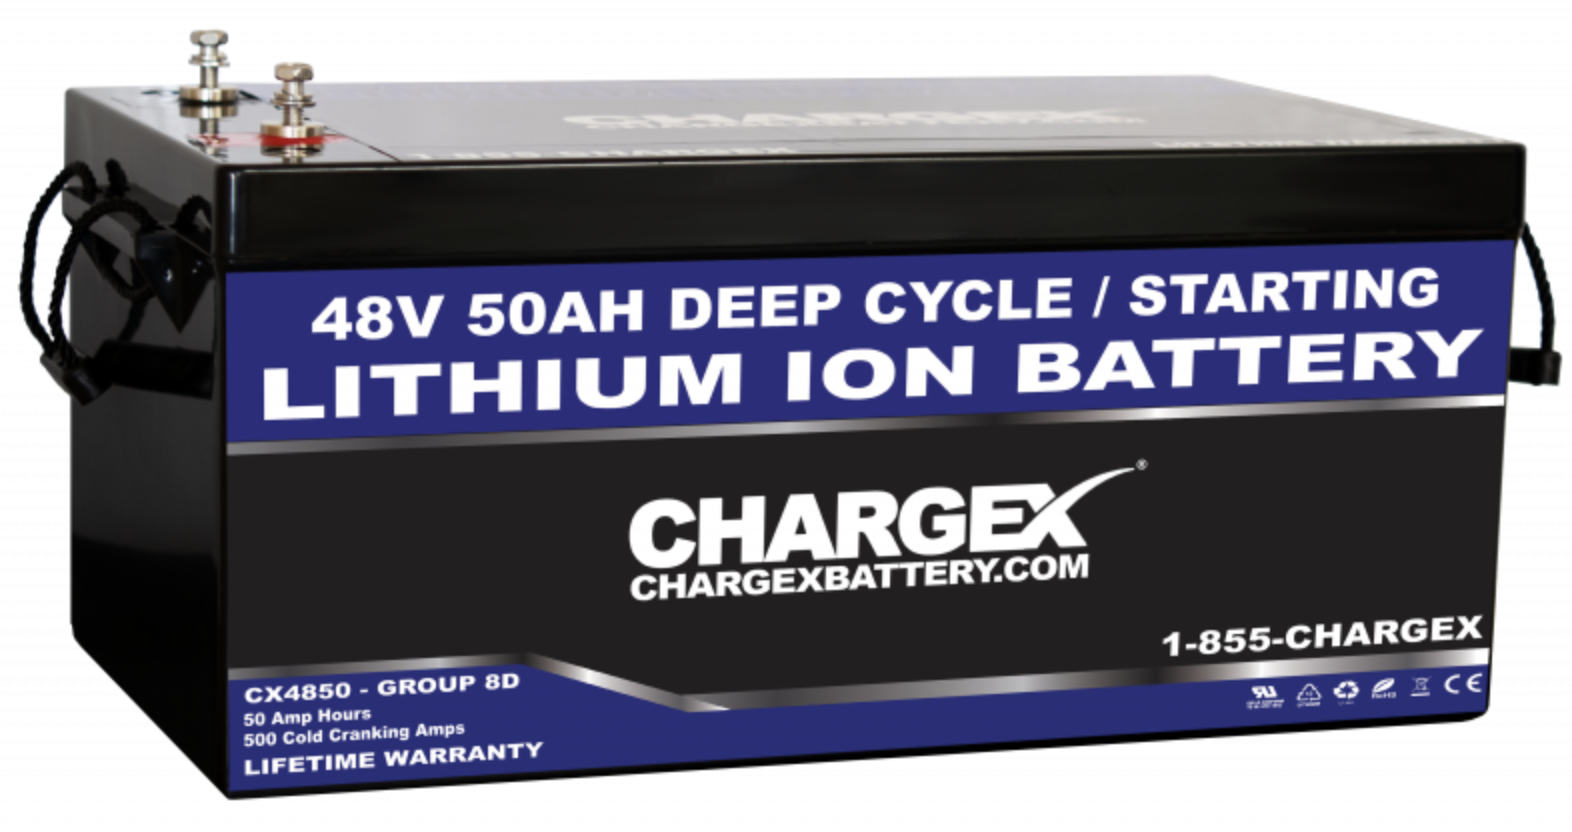 CHARGEX® 48V 50AH Deep Cycle Lithium Ion Battery